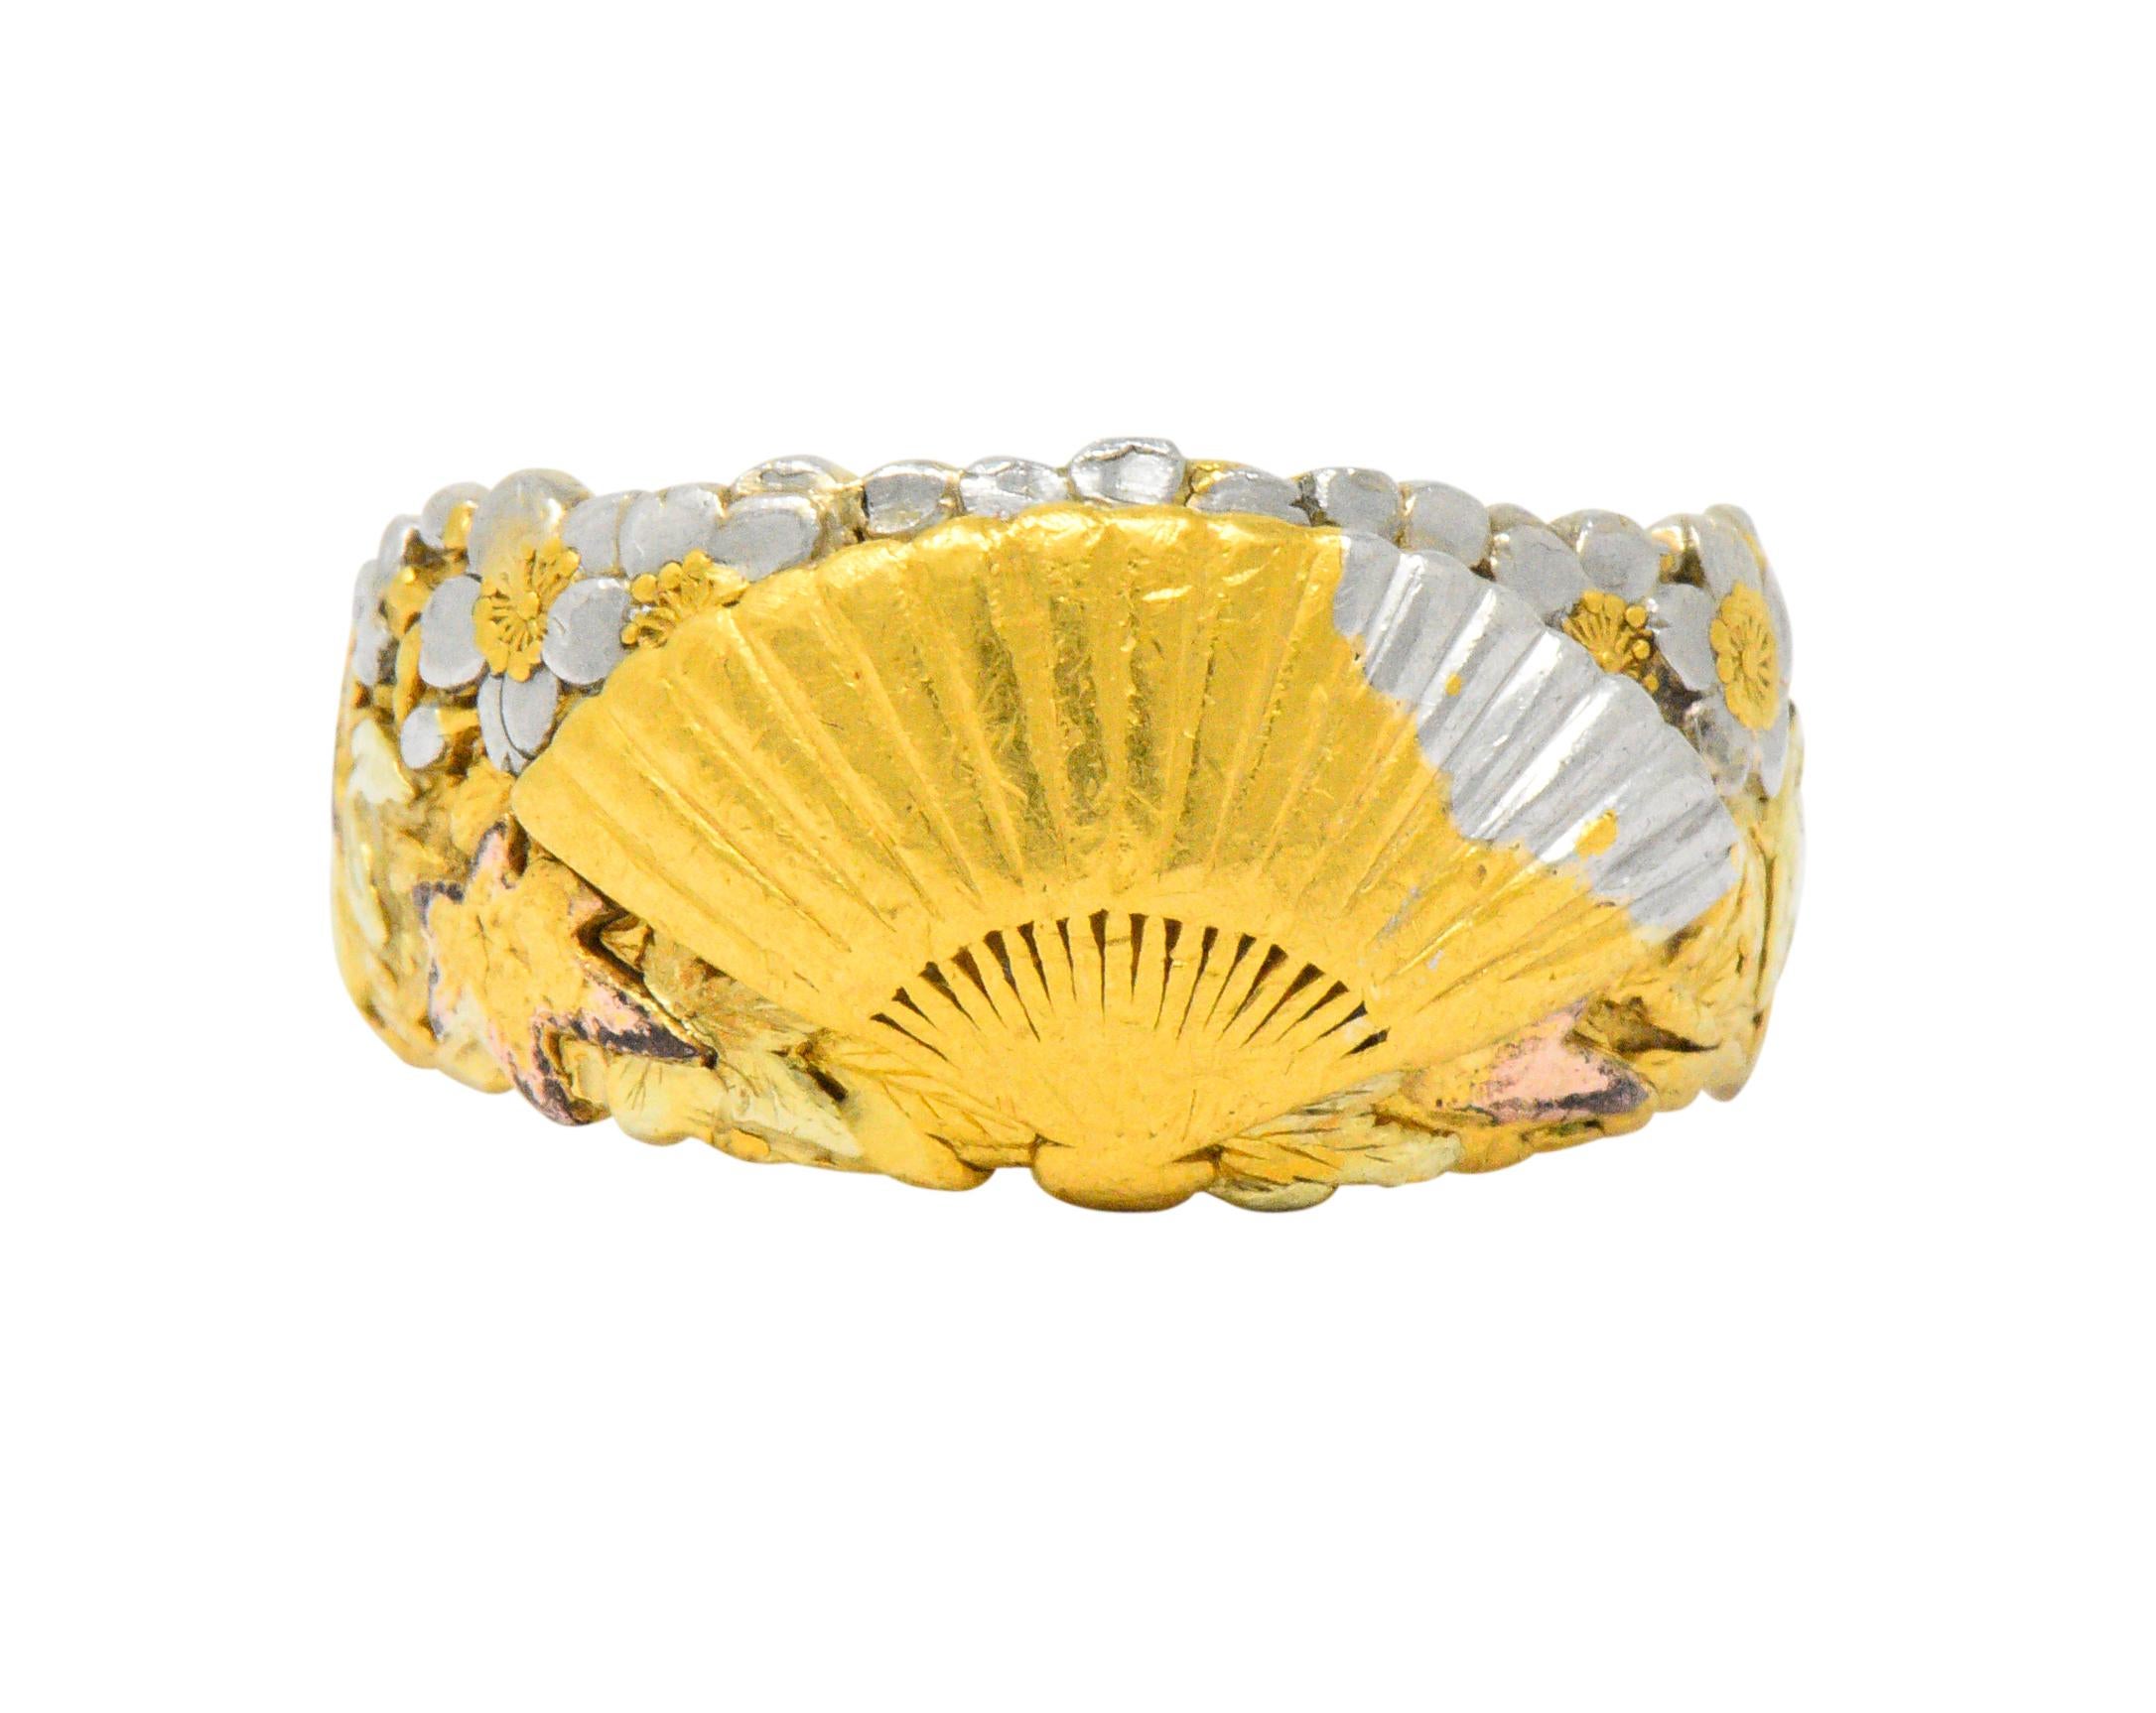 Centering a raised fan

With floral and foliate motifs accented in yellow, green, rose gold and platinum

Chinese signature

Tested as 22 karat gold

Ring Size: 8 1/2 & Sizable

Top measures 11.1 mm and sits 2.7 mm high

Total Weight: 14.3